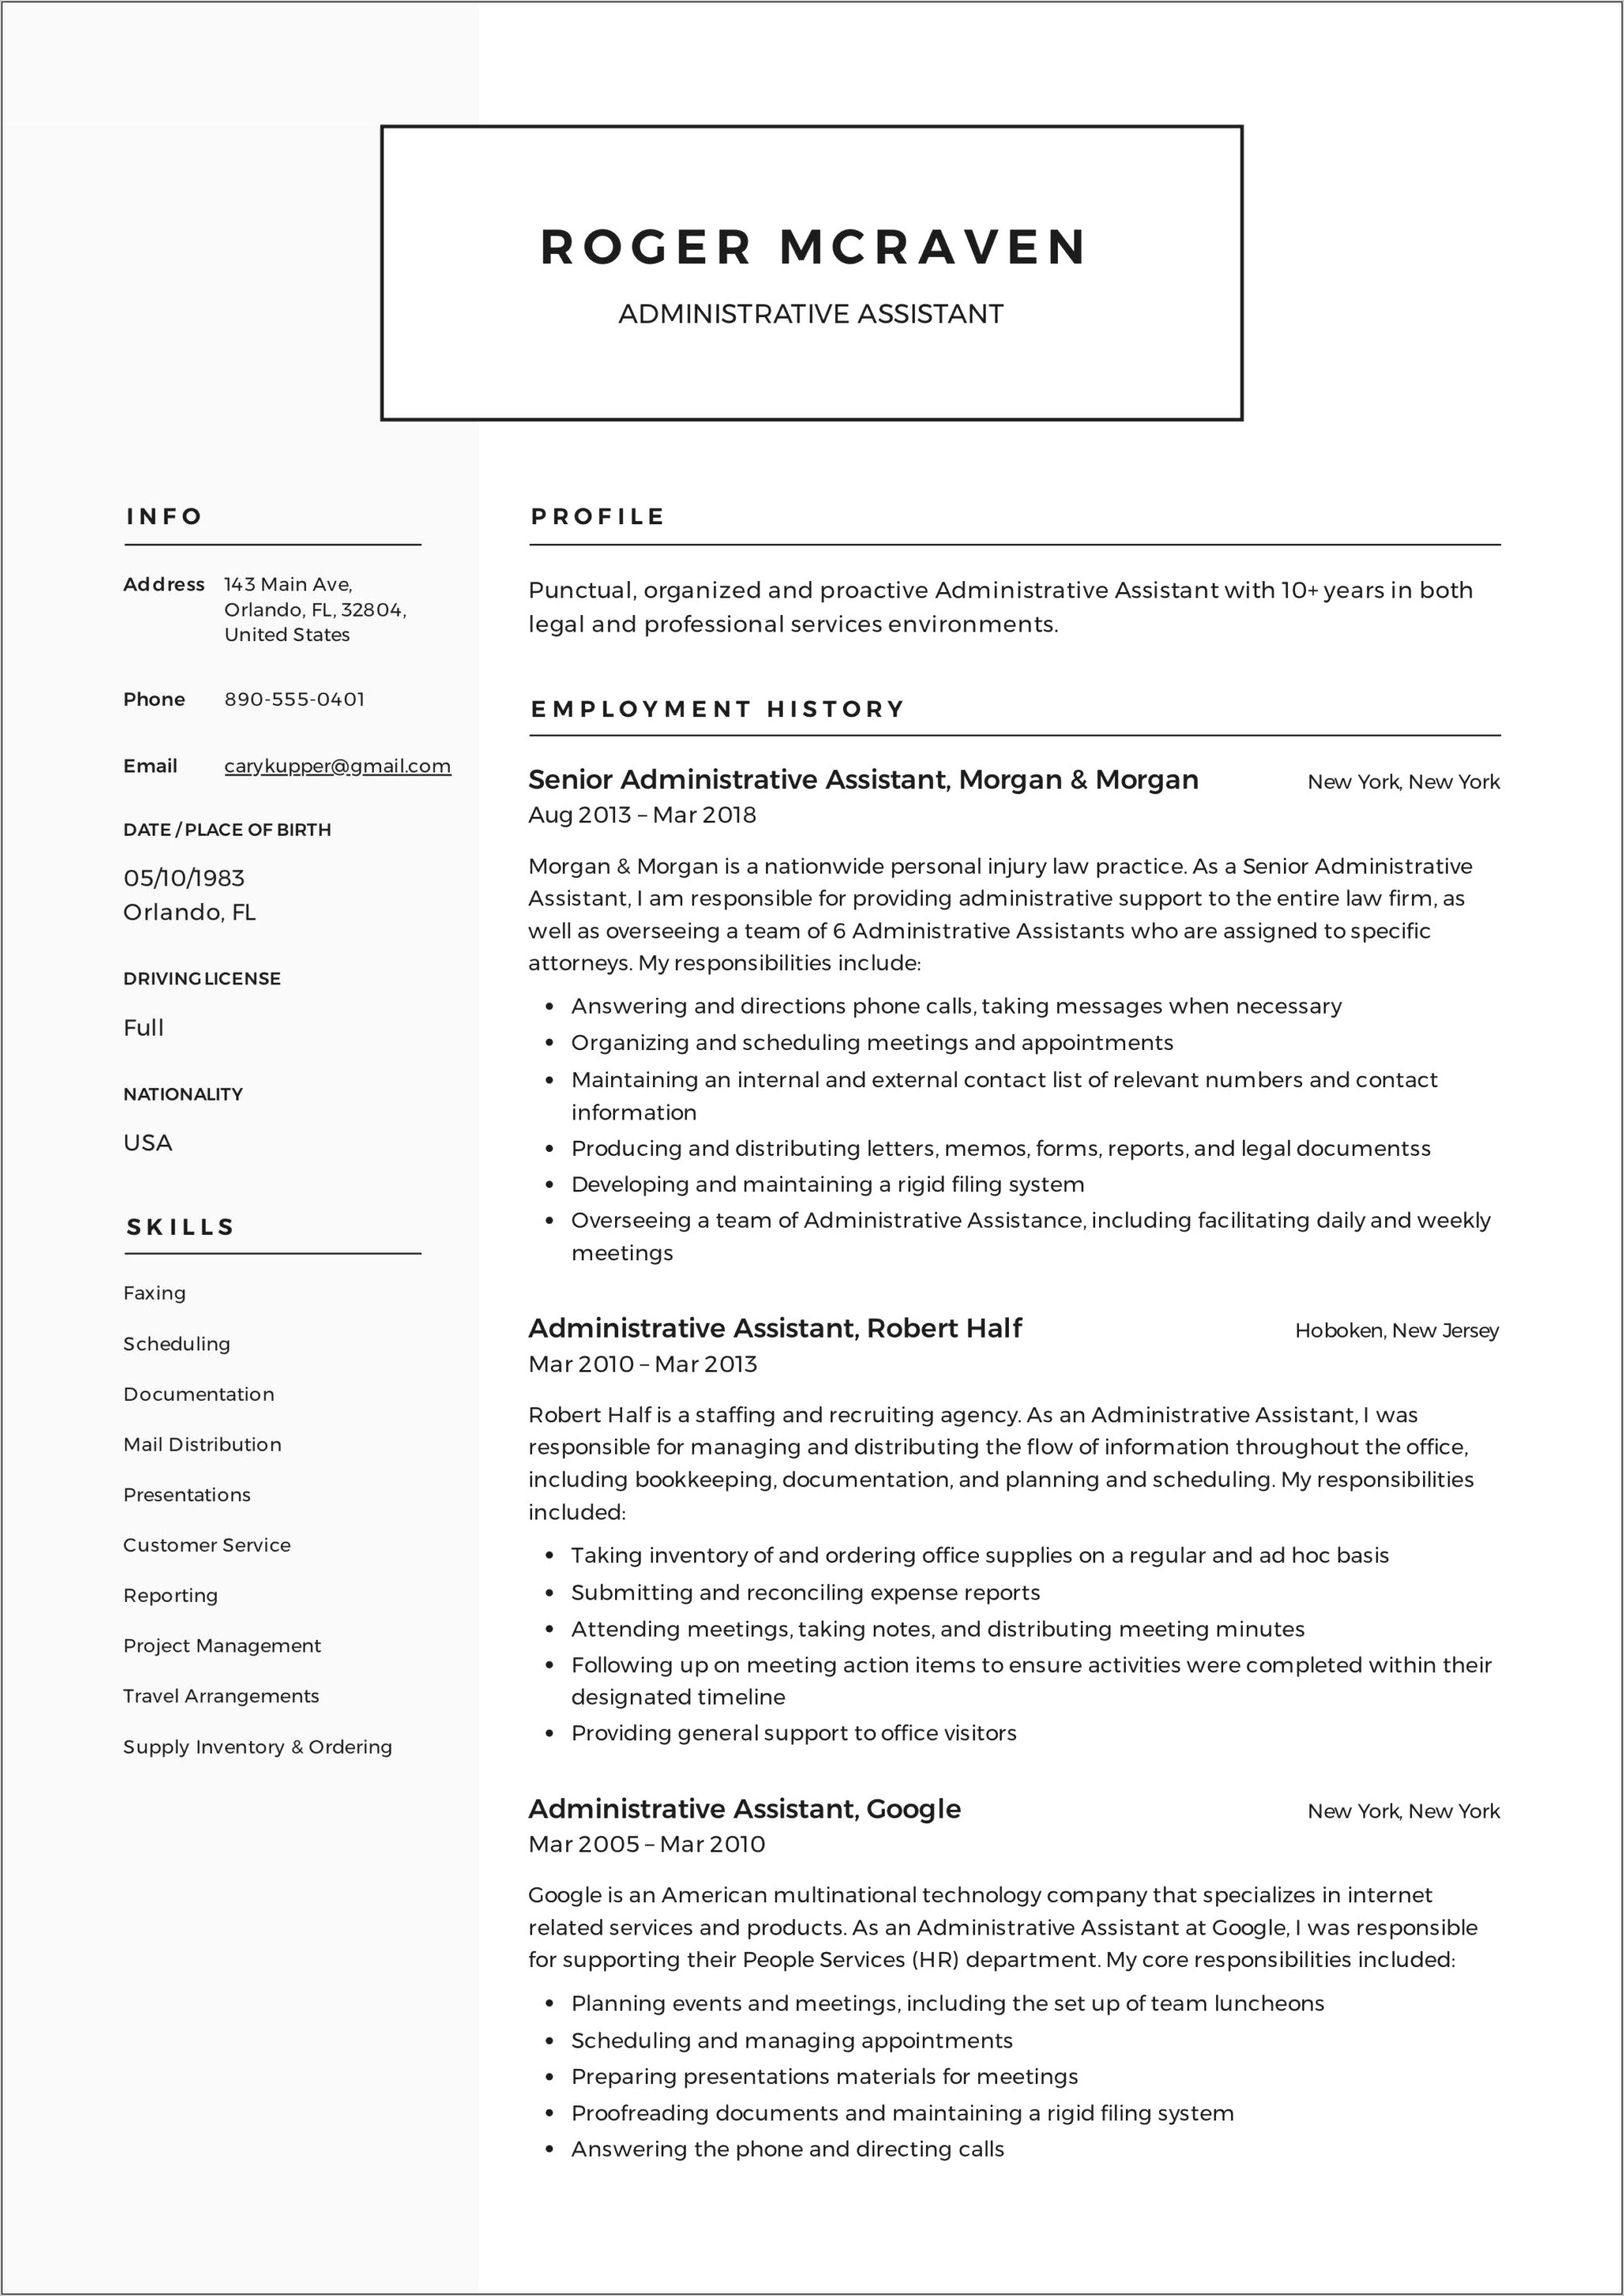 Admin Assistant Academia Resume Examples